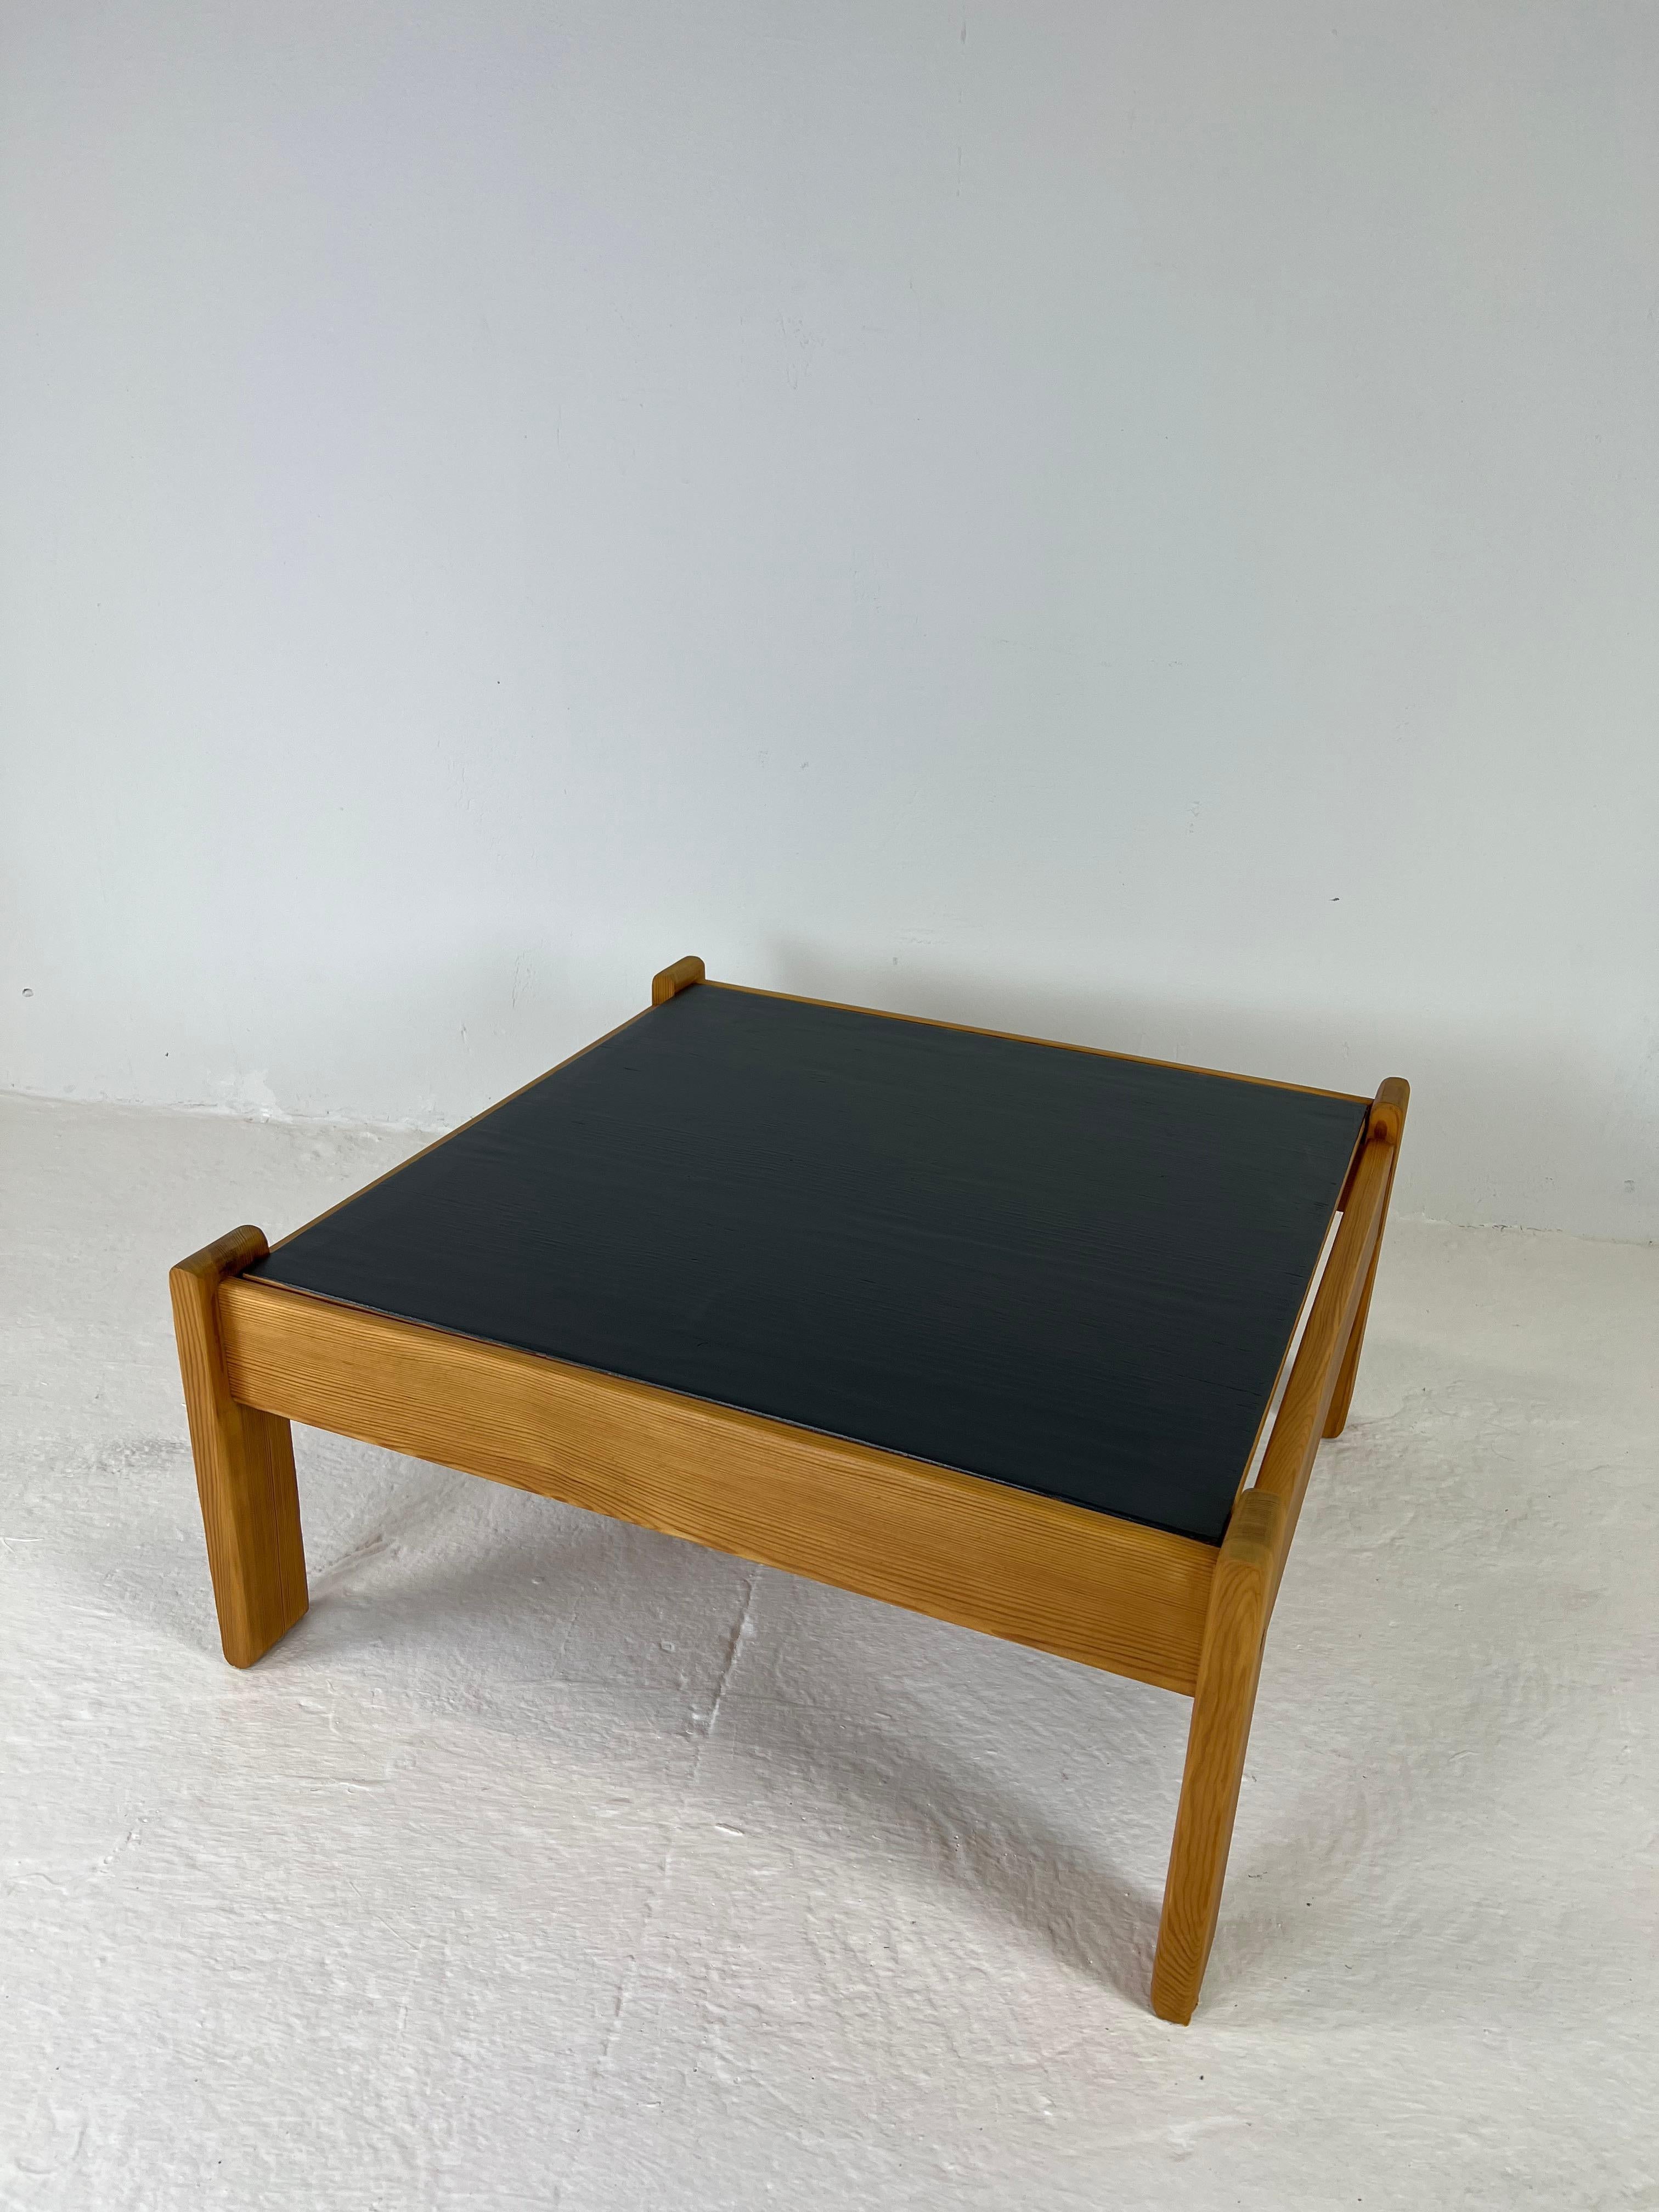 Two-Sided Modernist Coffee Table in Pine Wood, 1970s For Sale 7